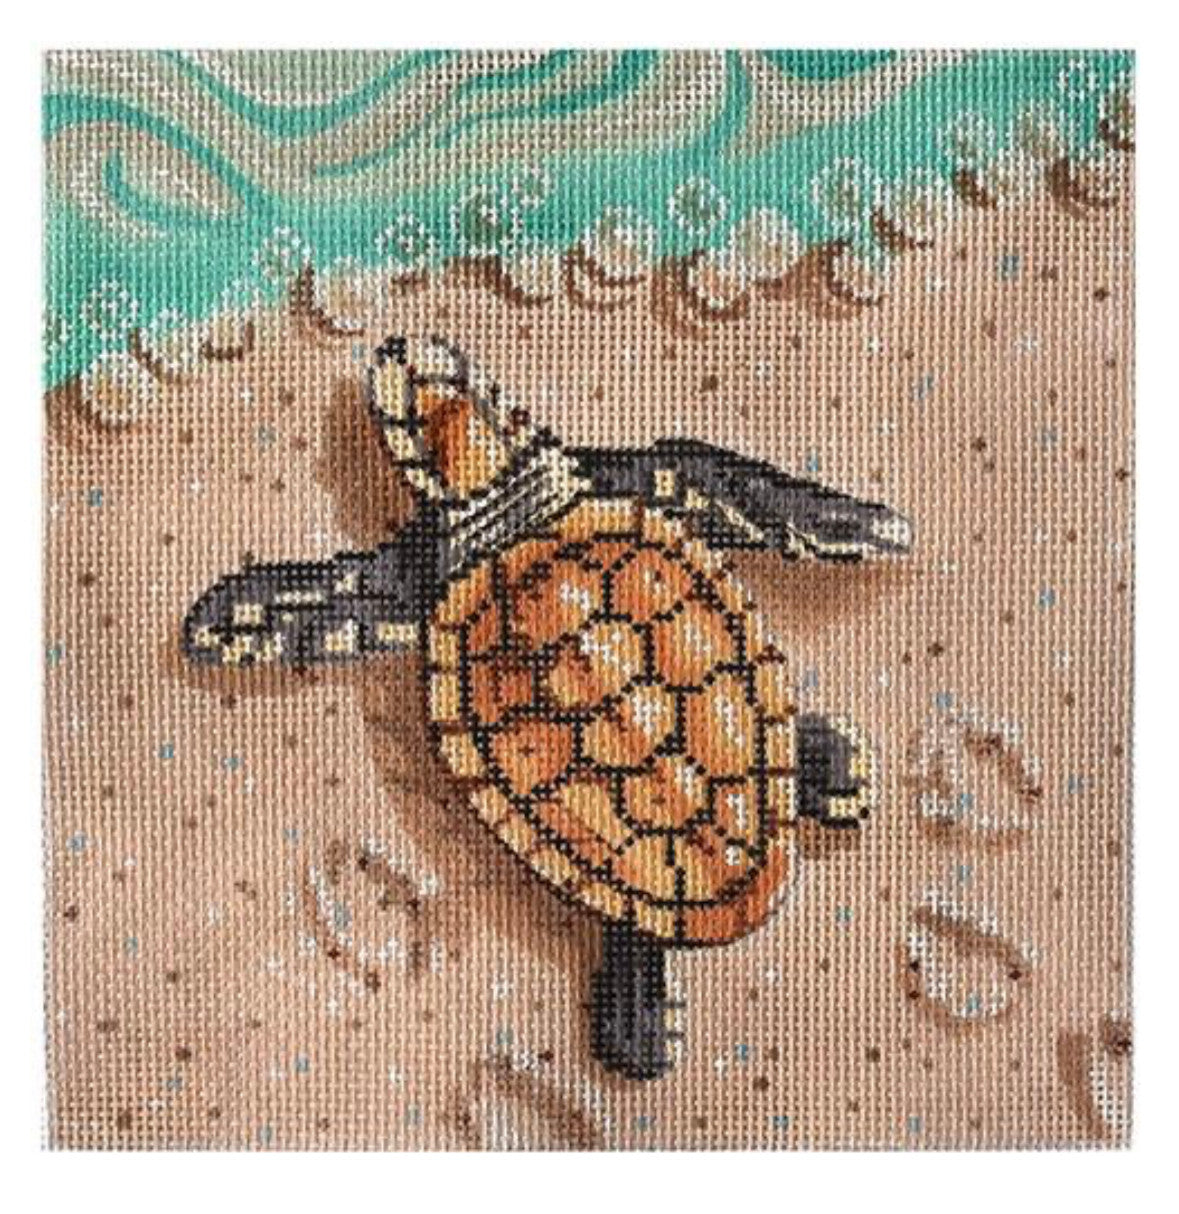 Labors of Love LL323 Baby sea Turtle STITCH GUIDE only